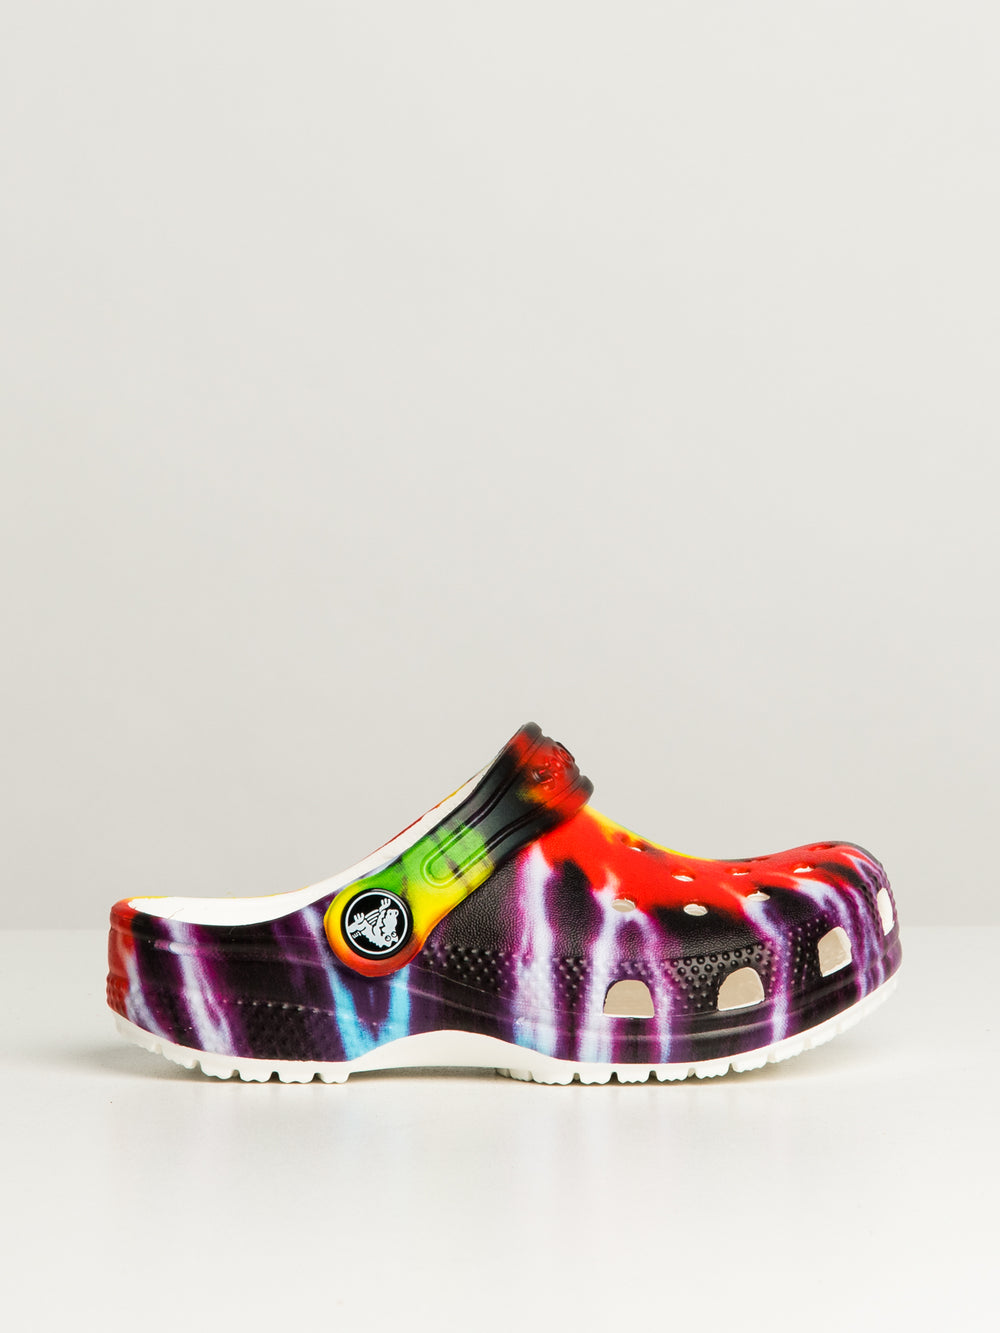 CROCS TODDLER CLASSIC TIE DYE GRAPHIC - CLEARANCE